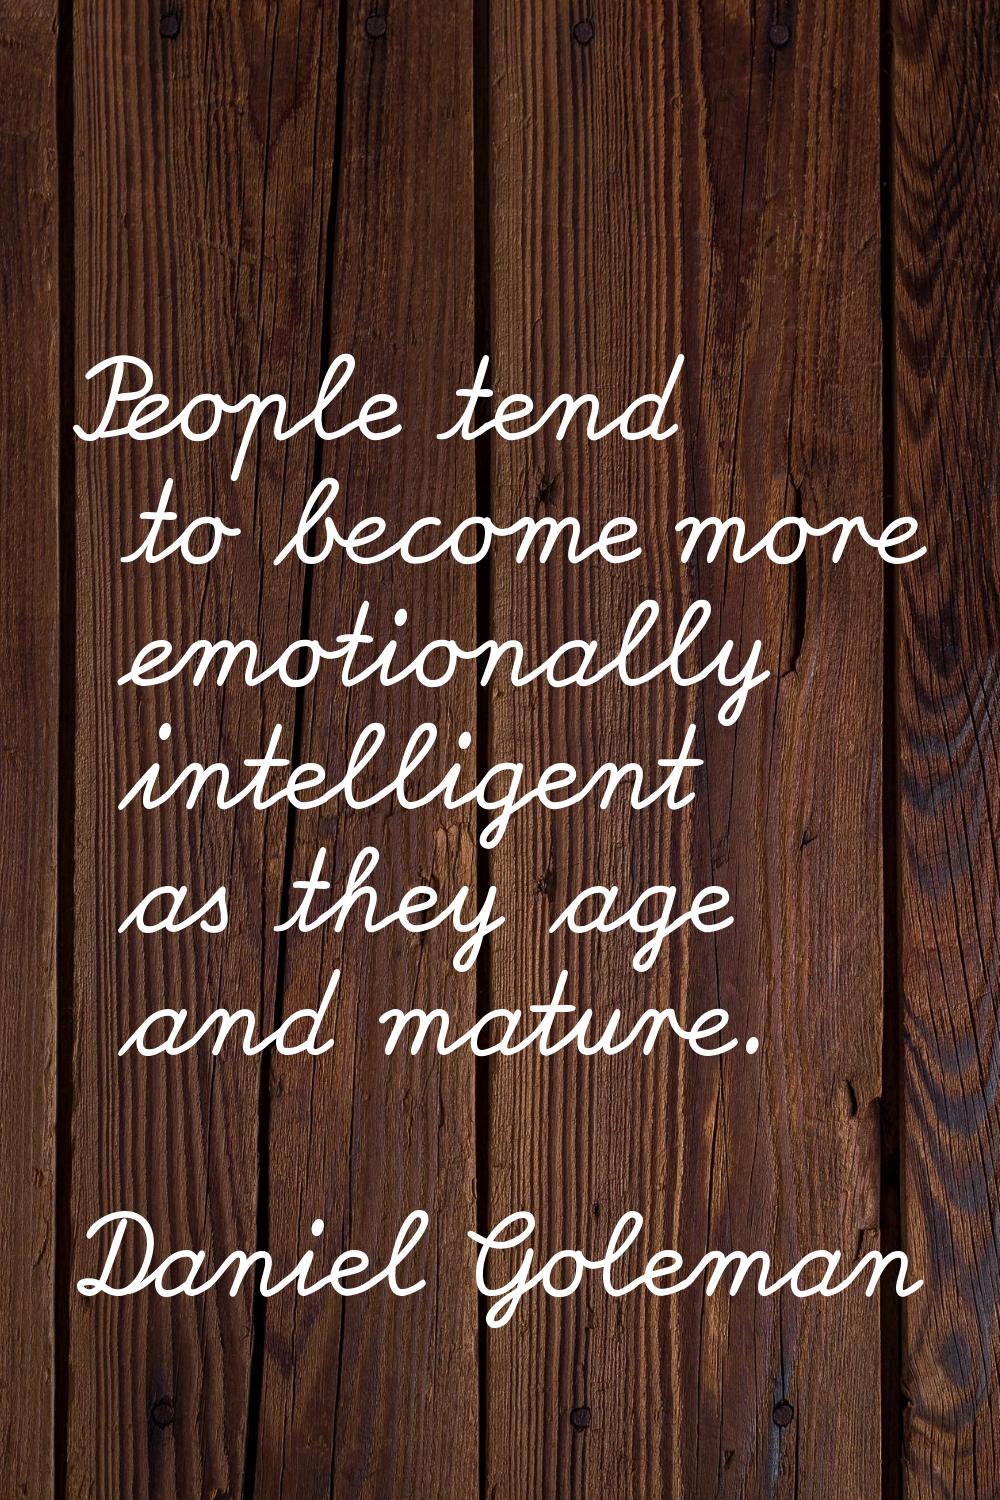 People tend to become more emotionally intelligent as they age and mature.